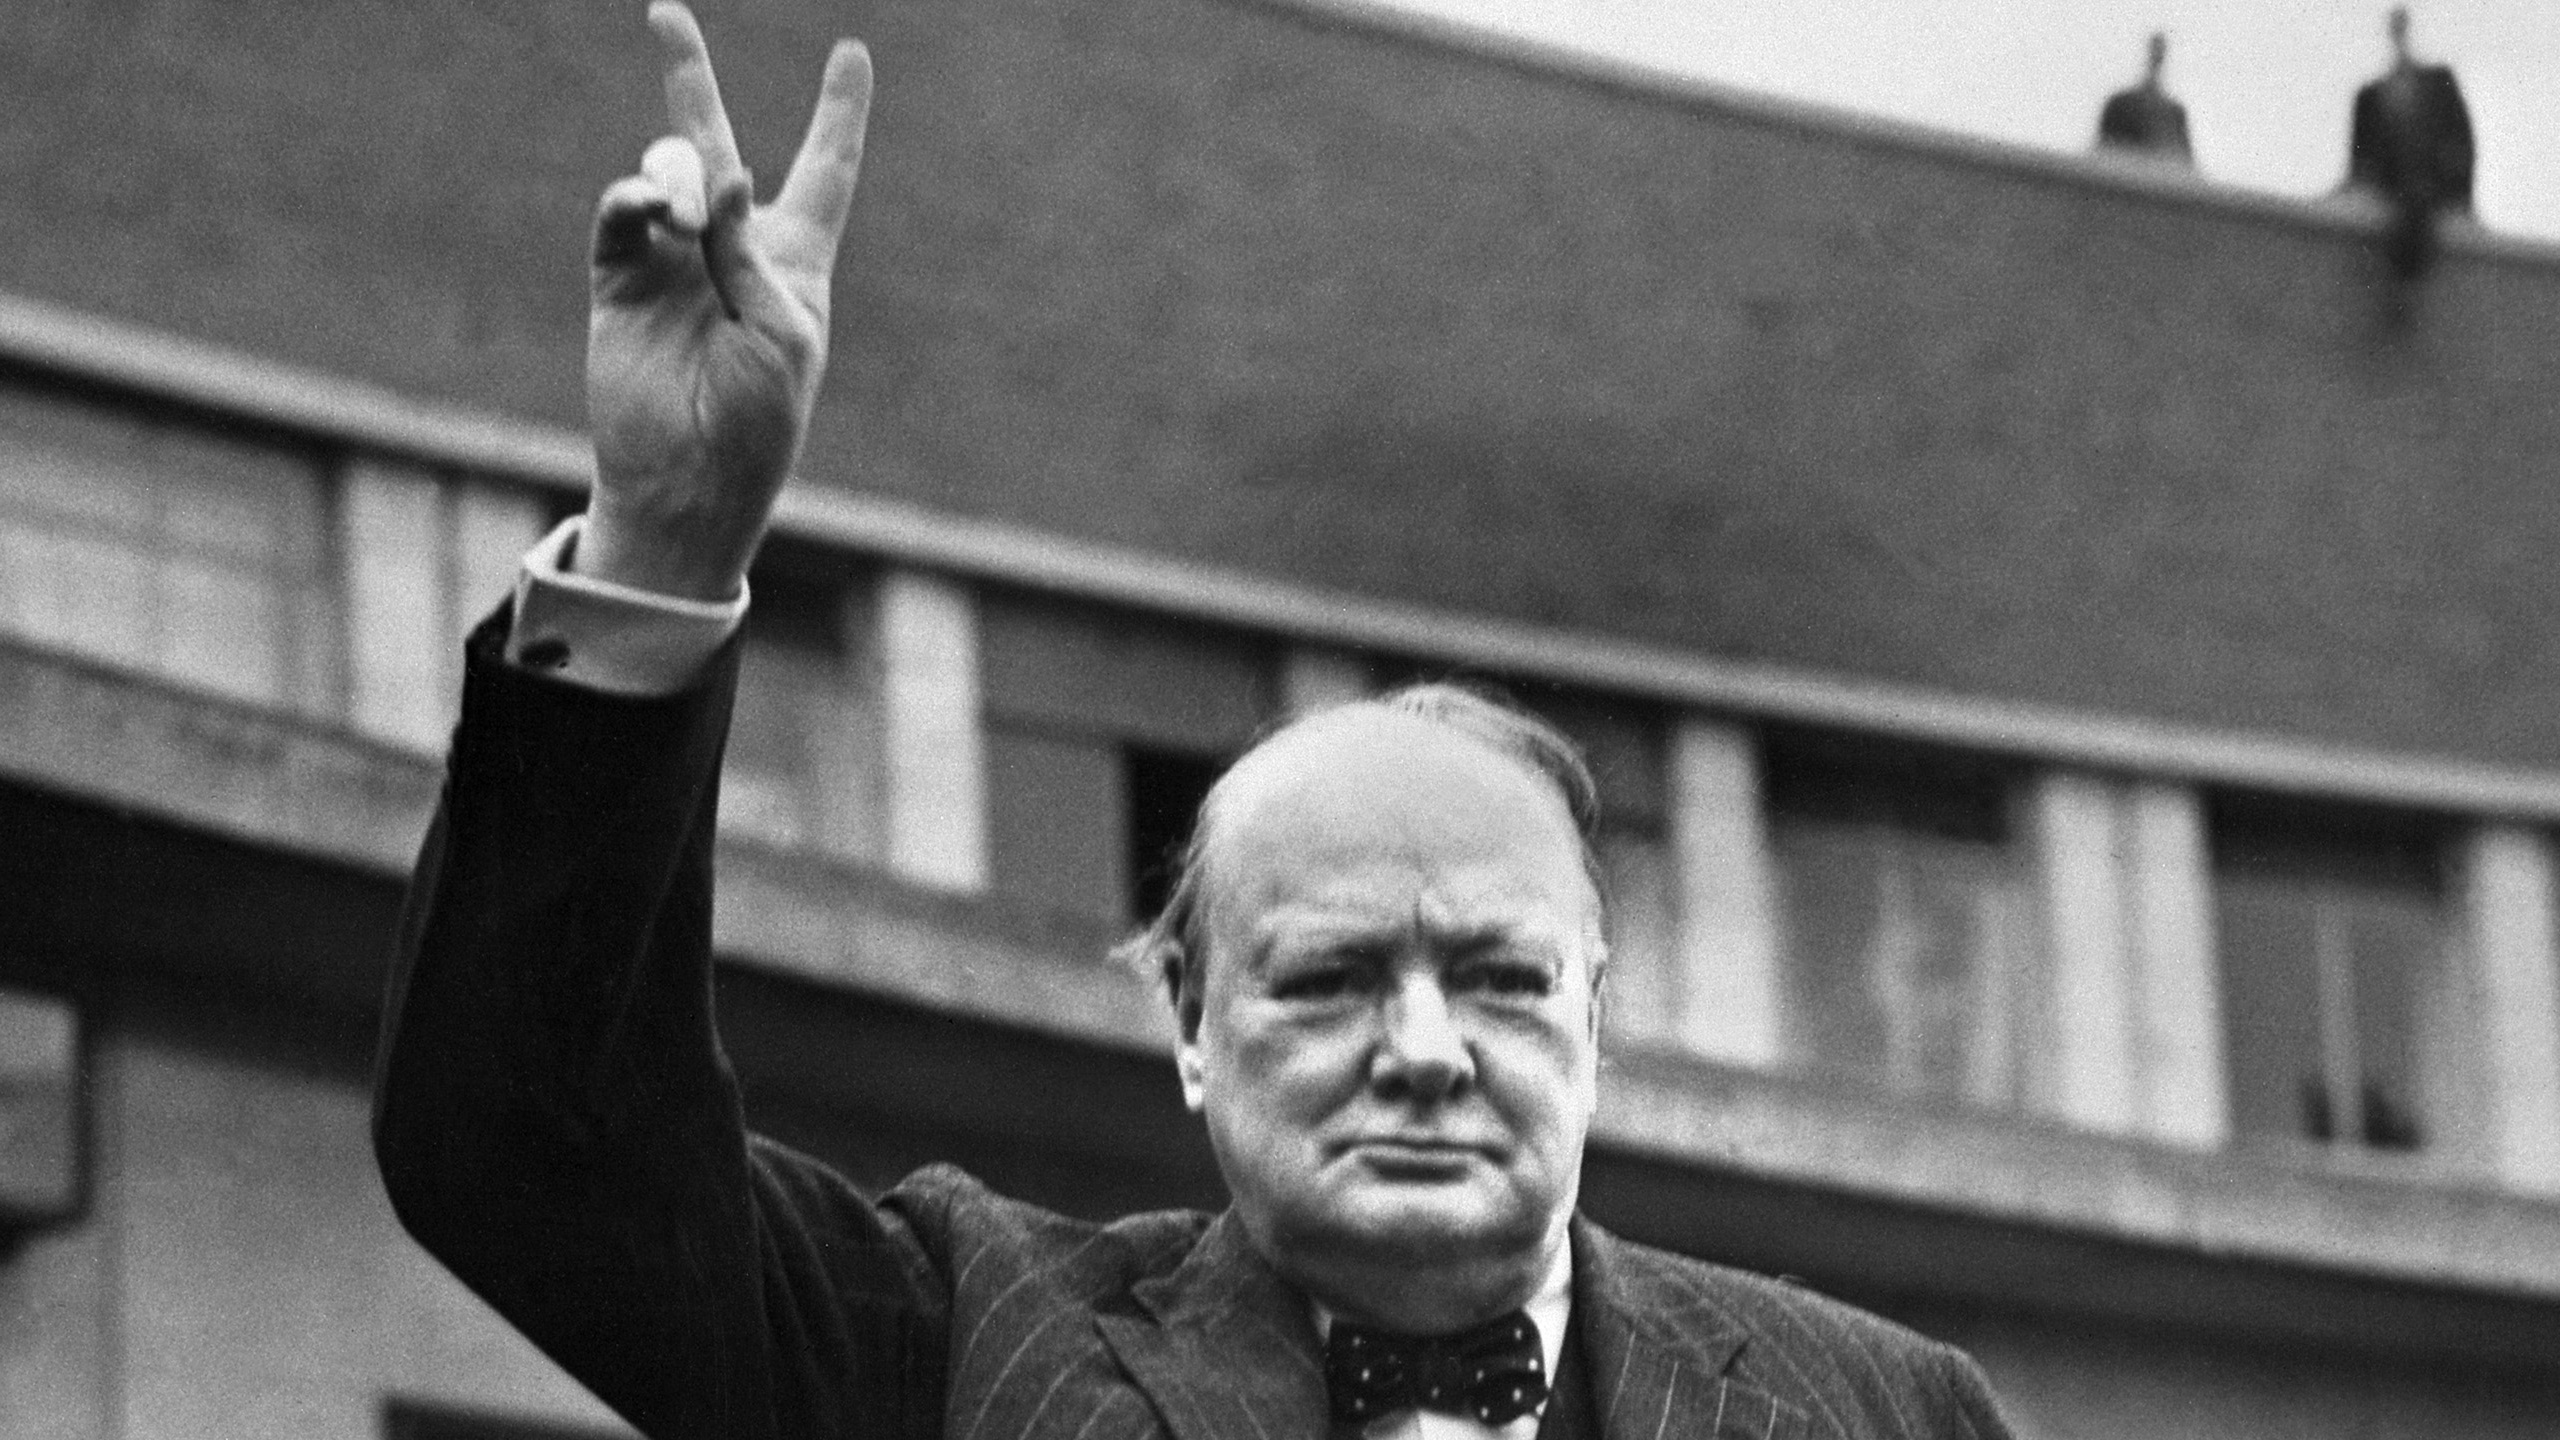 Sir Winston Churchill making the victory sign.